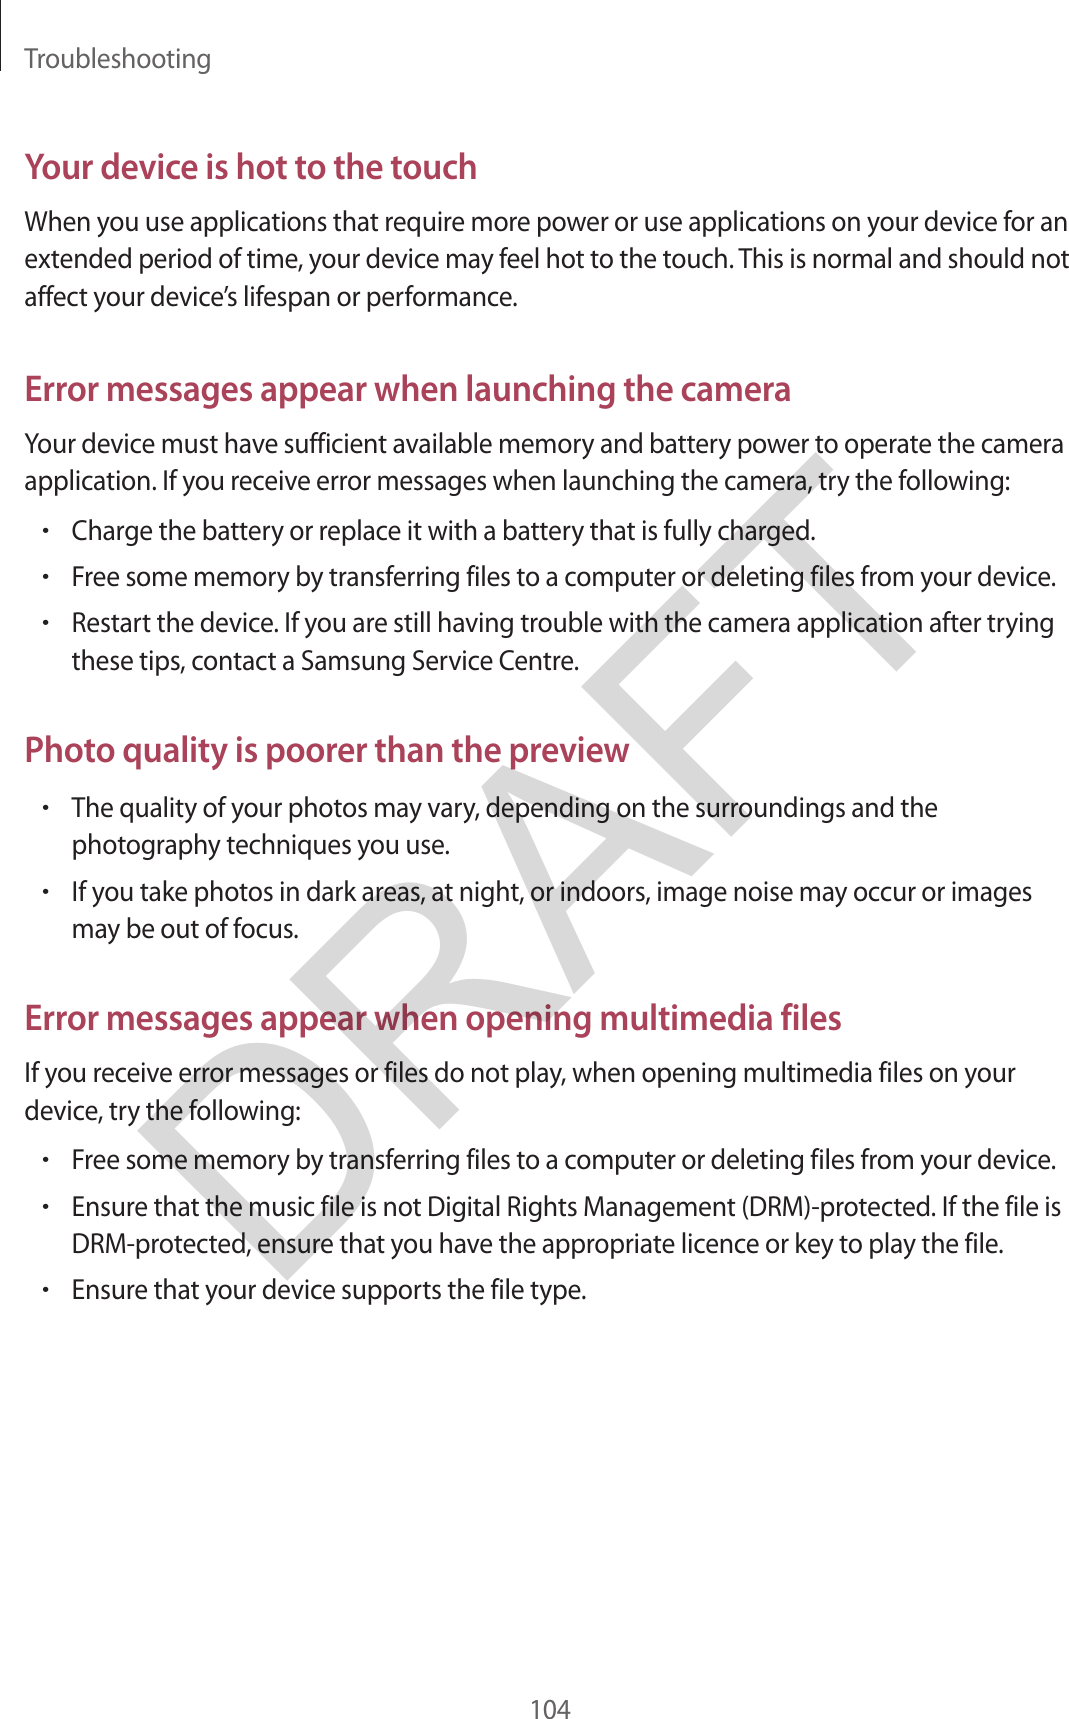 Troubleshooting104Your device is hot to the touchWhen you use applications that require more power or use applications on your device for an extended period of time, your device may feel hot to the touch. This is normal and should not affect your device’s lifespan or performance.Error messages appear when launching the cameraYour device must have sufficient available memory and battery power to operate the camera application. If you receive error messages when launching the camera, try the following:•Charge the battery or replace it with a battery that is fully charged.•Free some memory by transferring files to a computer or deleting files from your device.•Restart the device. If you are still having trouble with the camera application after tryingthese tips, contact a Samsung Service Centre.Photo quality is poorer than the preview•The quality of your photos may vary, depending on the surroundings and thephotography techniques you use.•If you take photos in dark areas, at night, or indoors, image noise may occur or imagesmay be out of focus.Error messages appear when opening multimedia filesIf you receive error messages or files do not play, when opening multimedia files on your device, try the following:•Free some memory by transferring files to a computer or deleting files from your device.•Ensure that the music file is not Digital Rights Management (DRM)-protected. If the file isDRM-protected, ensure that you have the appropriate licence or key to play the file.•Ensure that your device supports the file type.DRAFT